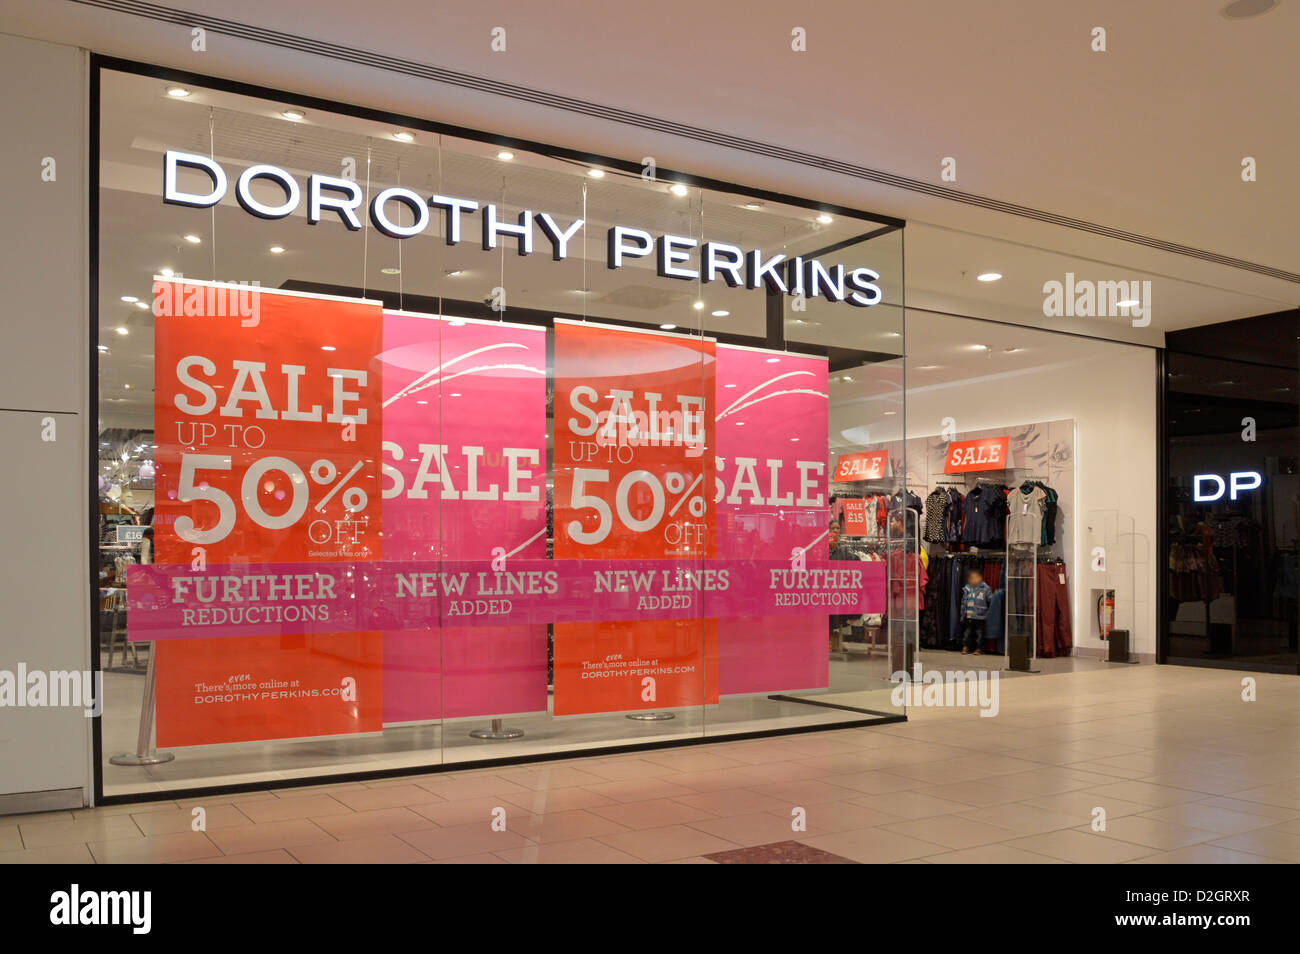 Dorothy Perkins shopping mall store ...